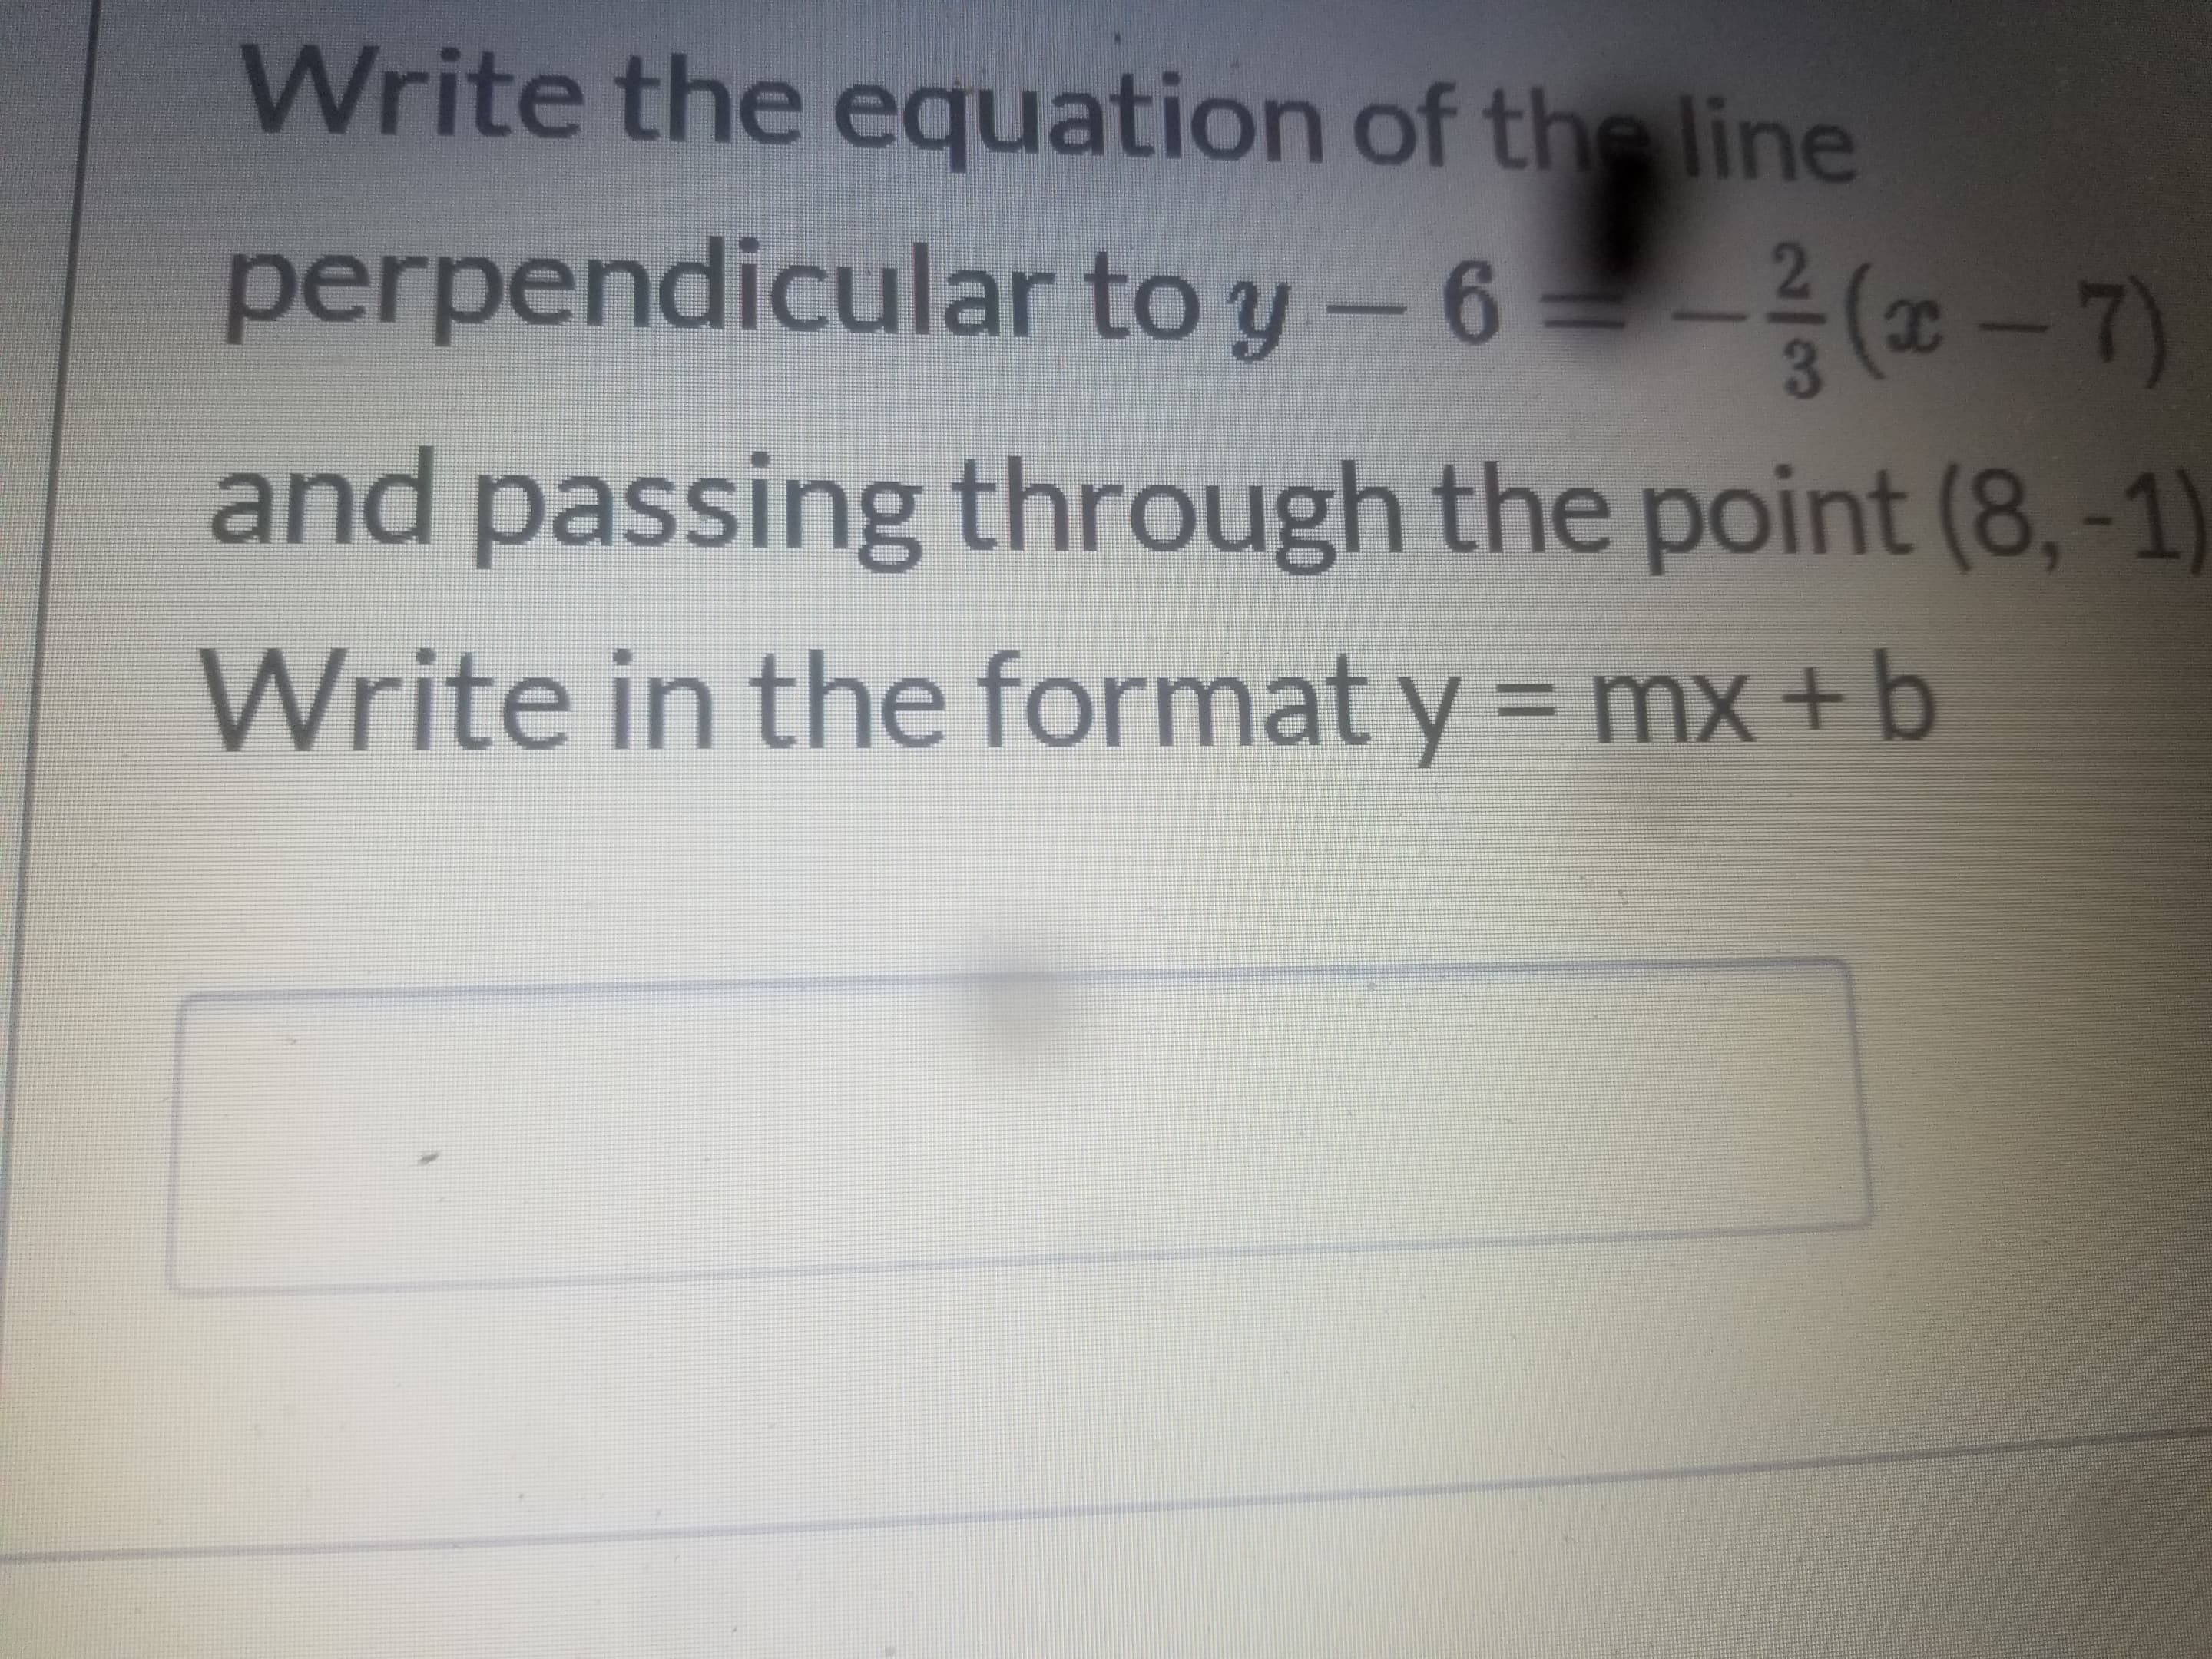 Write the equation of the line
perpendicular to y-6-(* - 7)
3
and passing through the point (8,-1)
Write in the format y = mx+b
